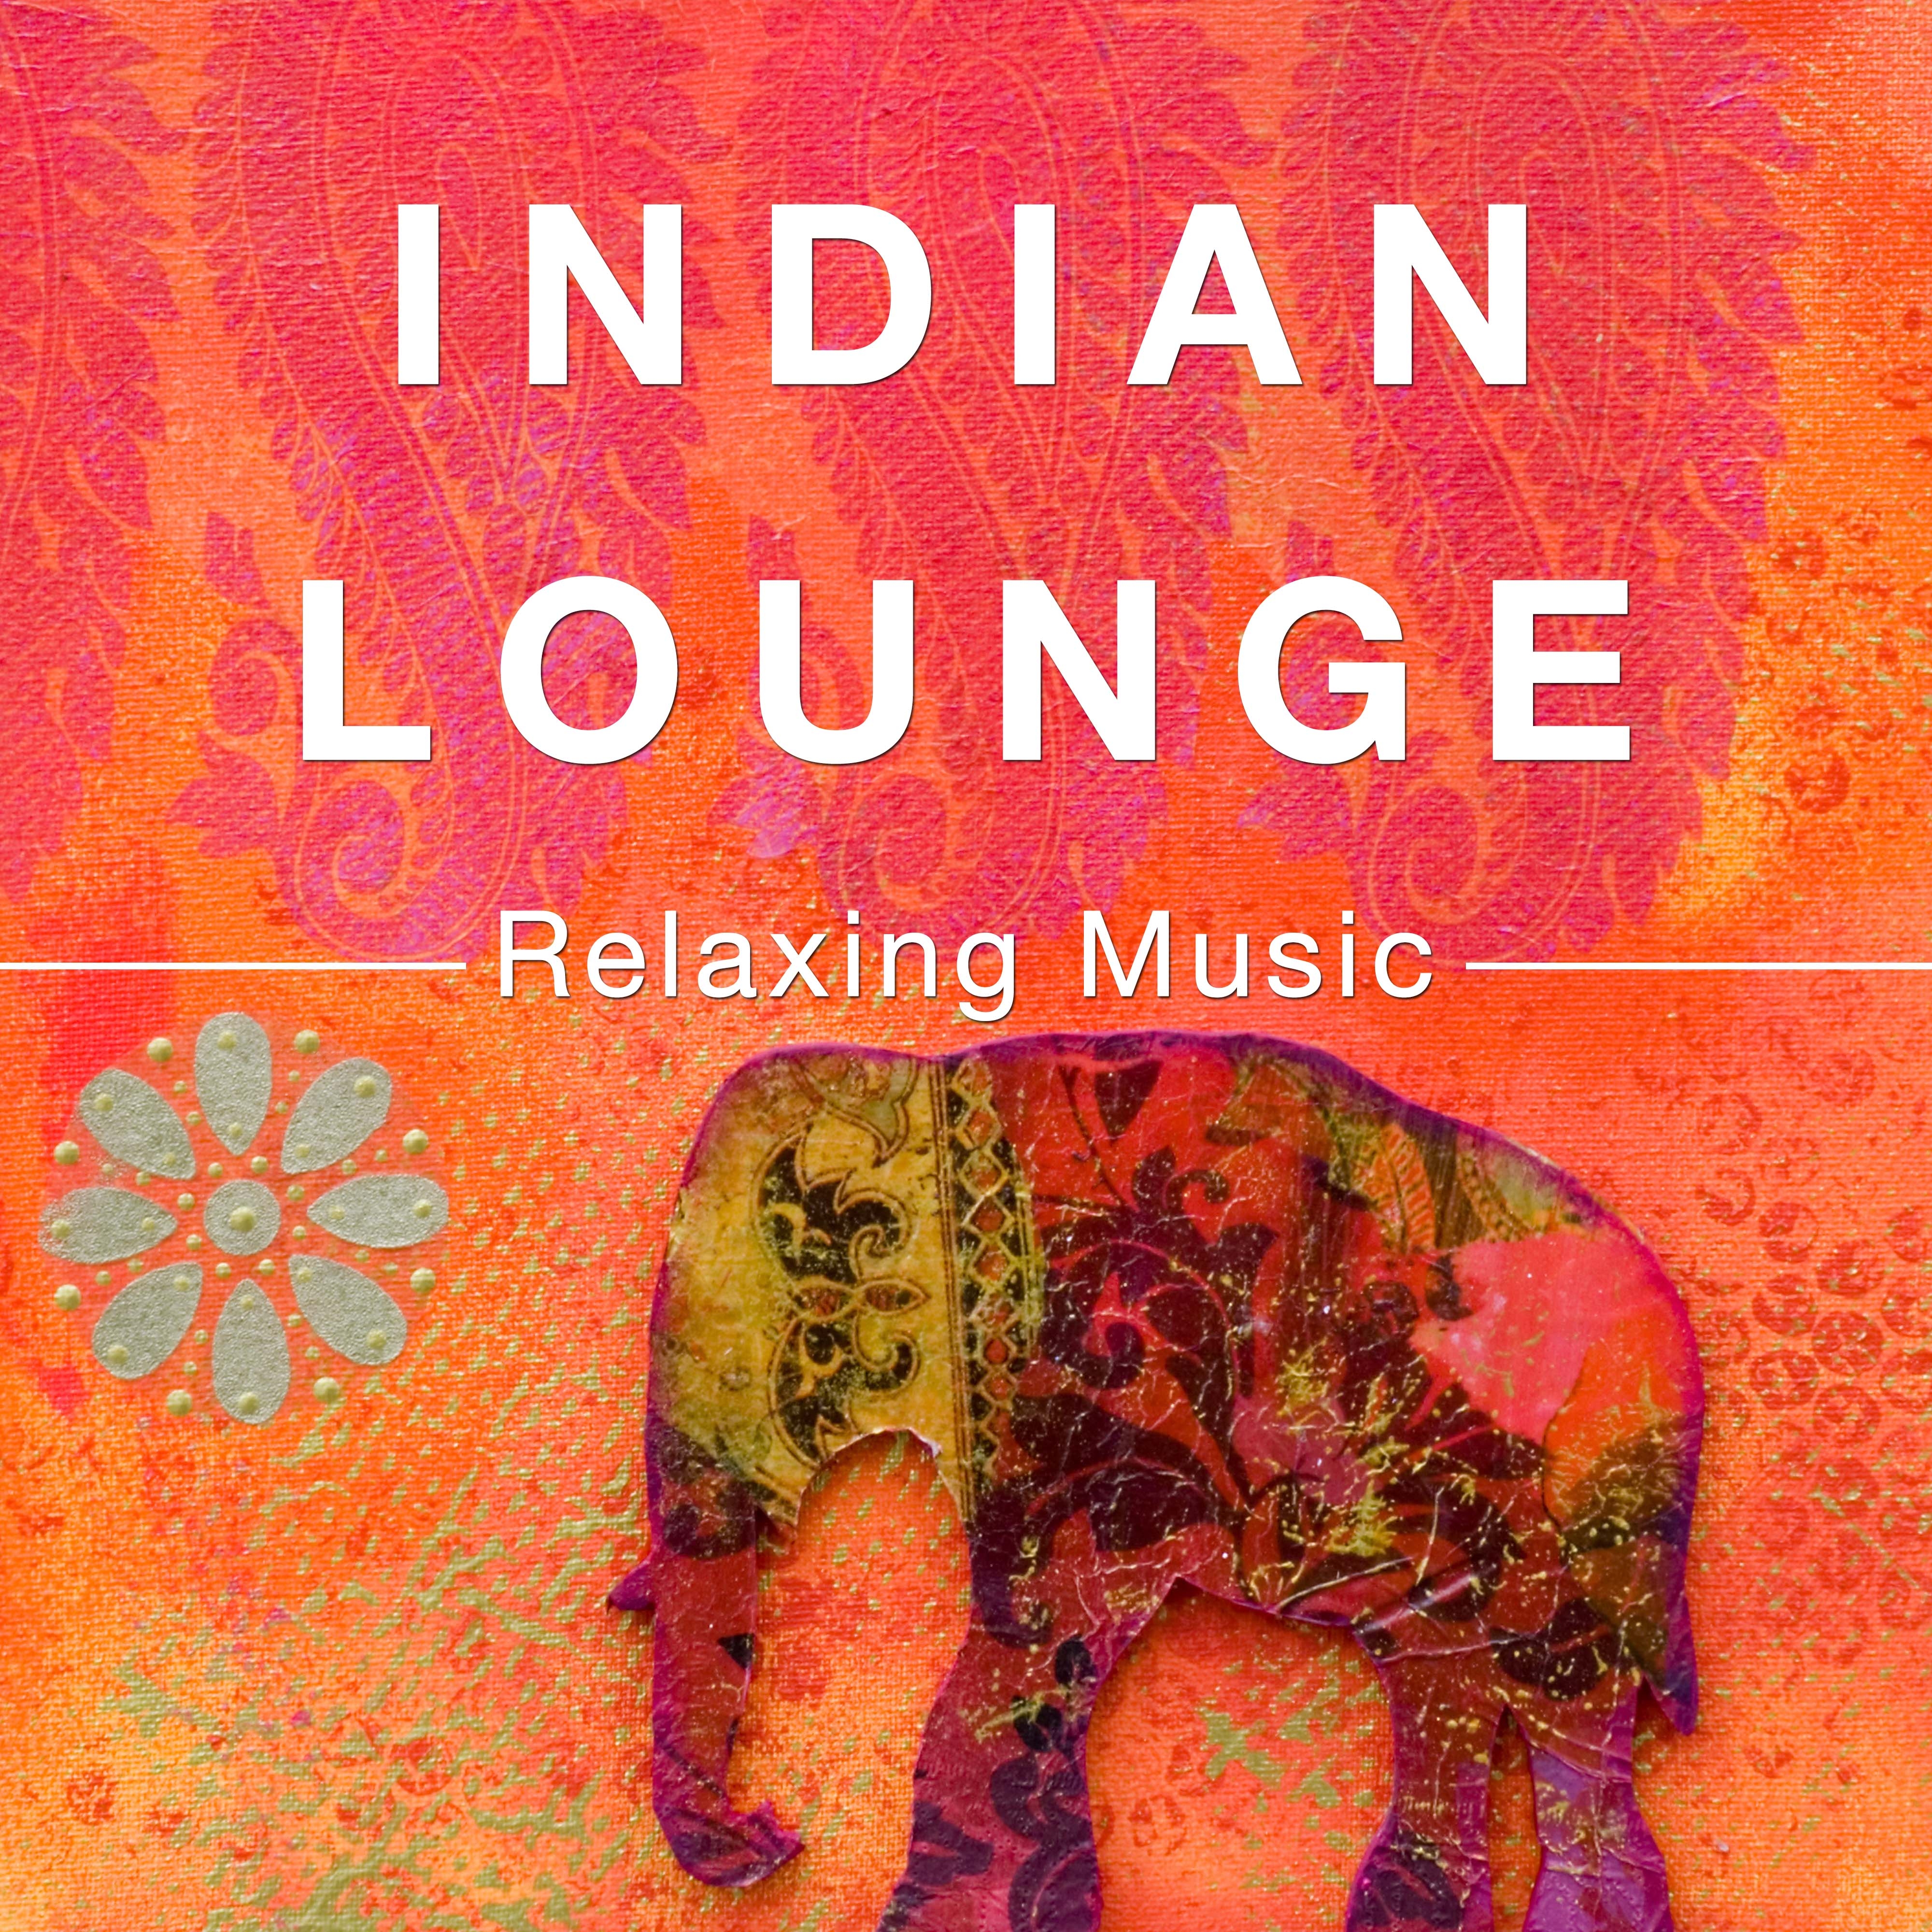 Indian Lounge - Relaxing Music for your Six Senses